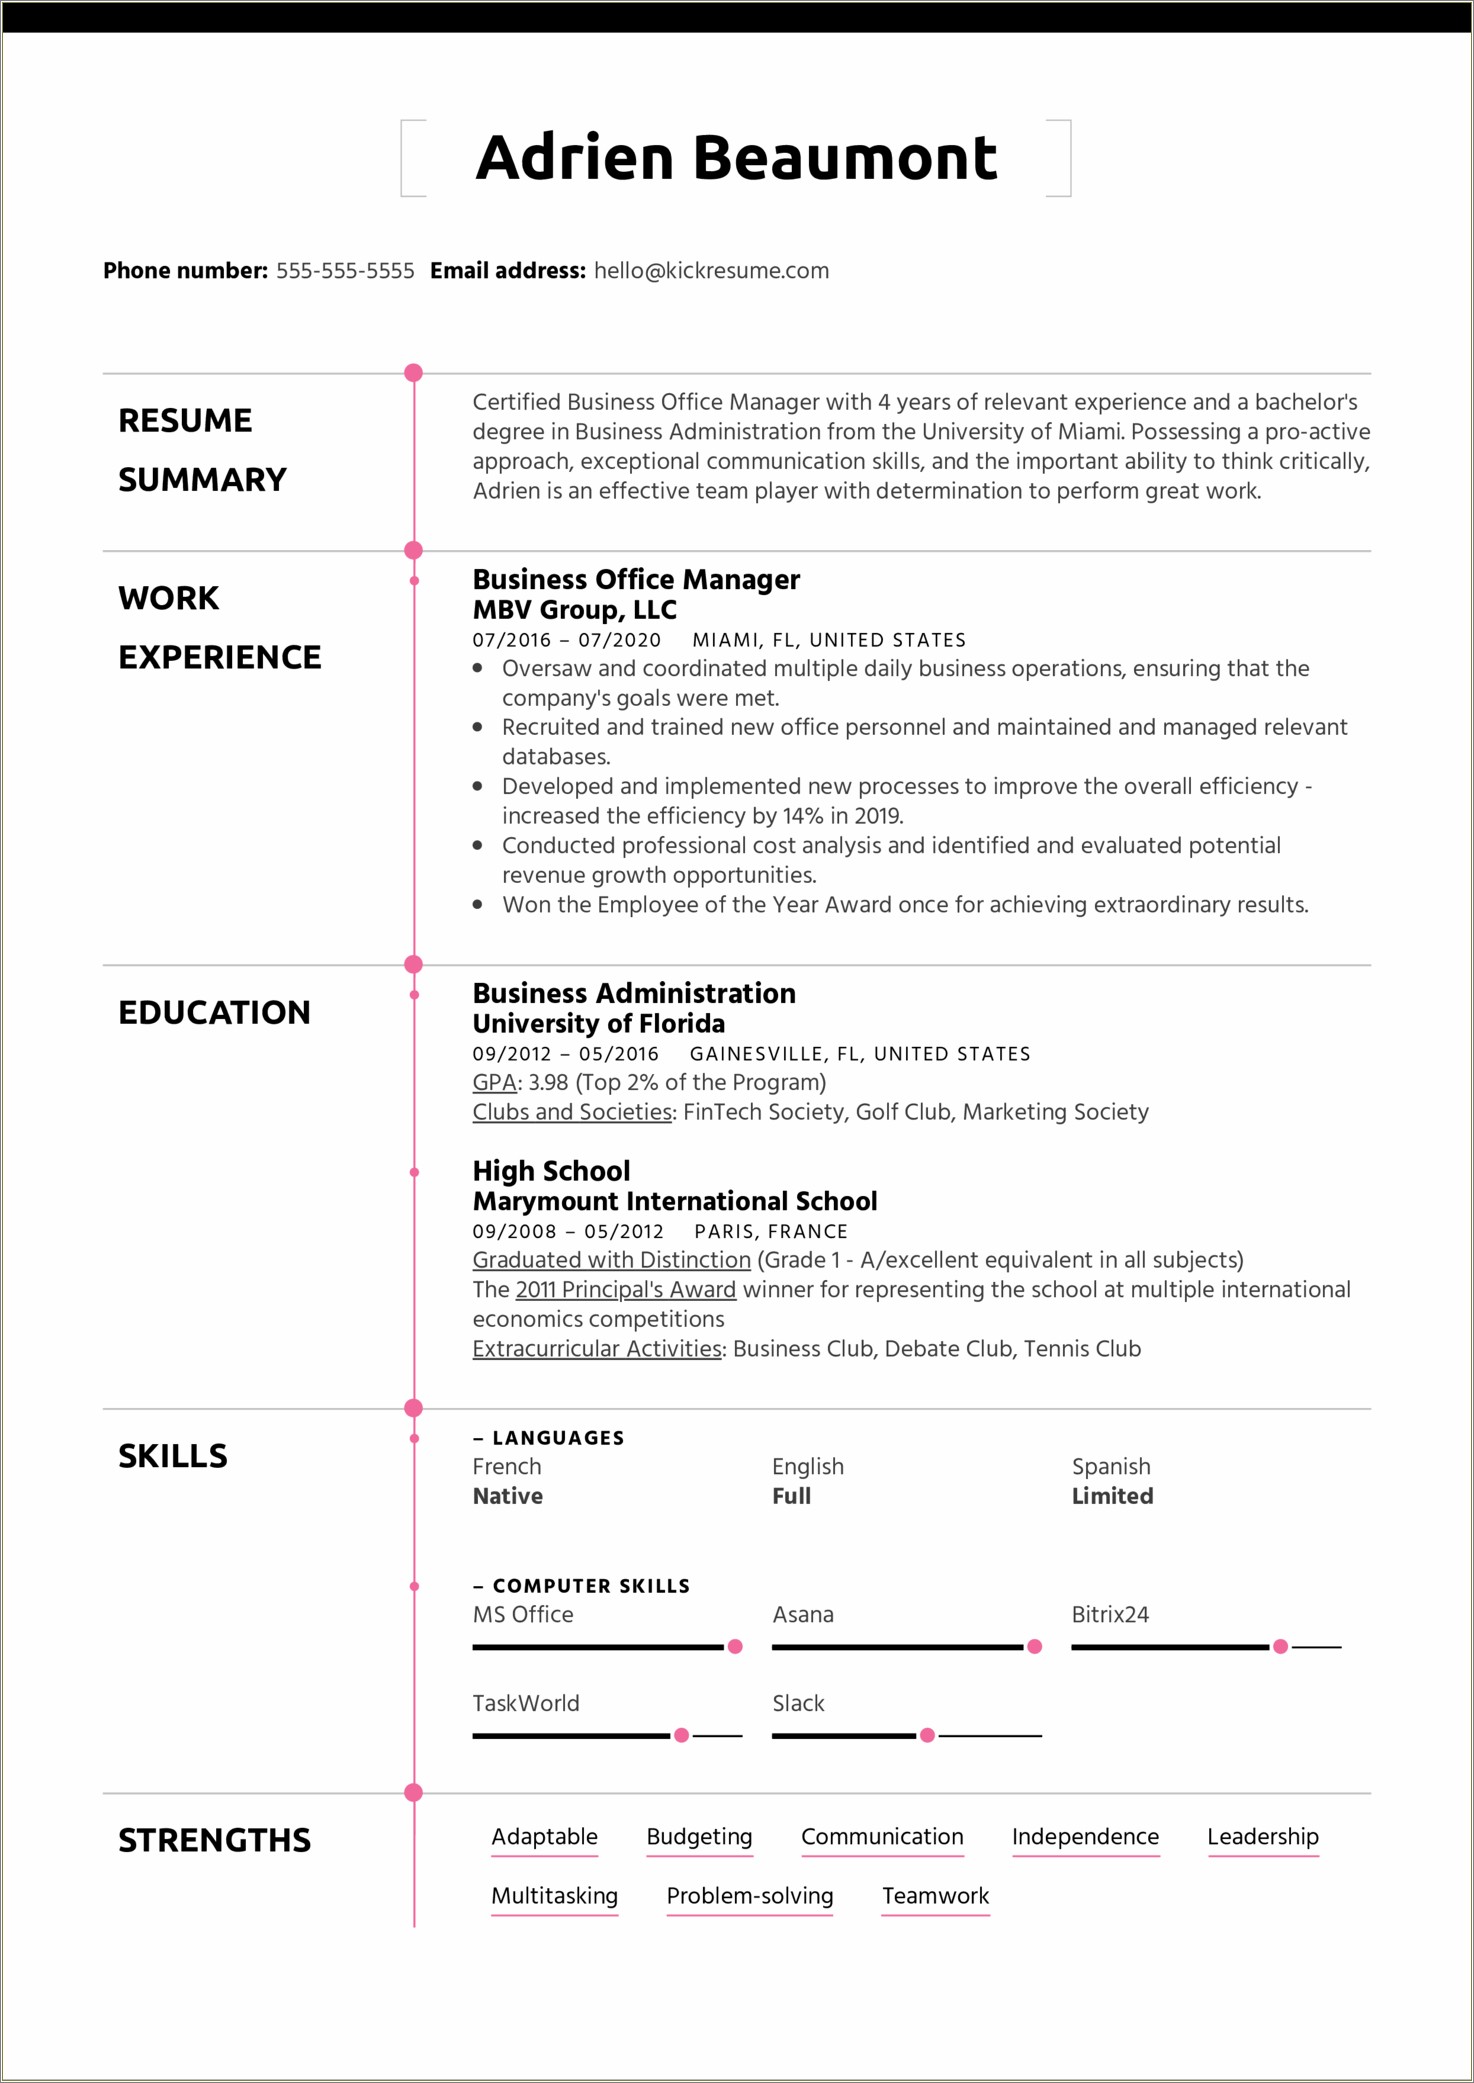 Job Application Personal Strengths In Resume